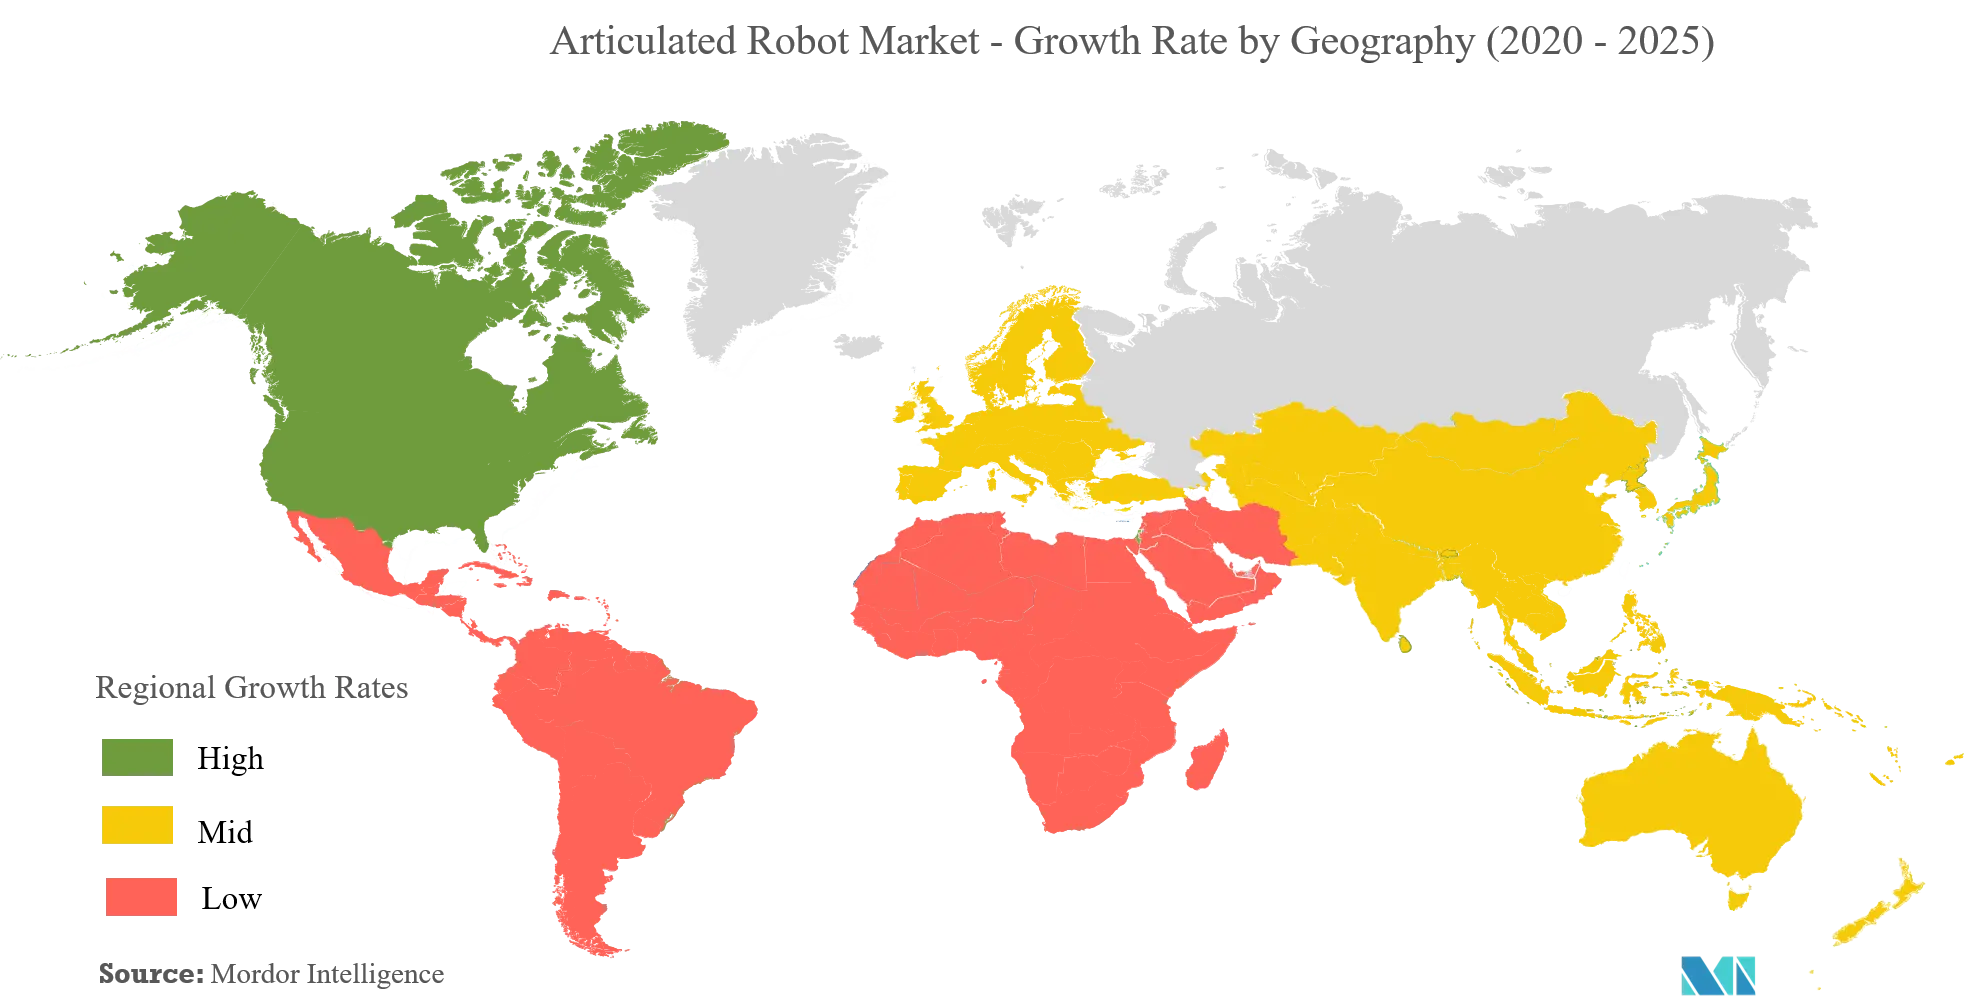 Articulated Robot Market - Growth Rate by Geography (2020 - 2025)